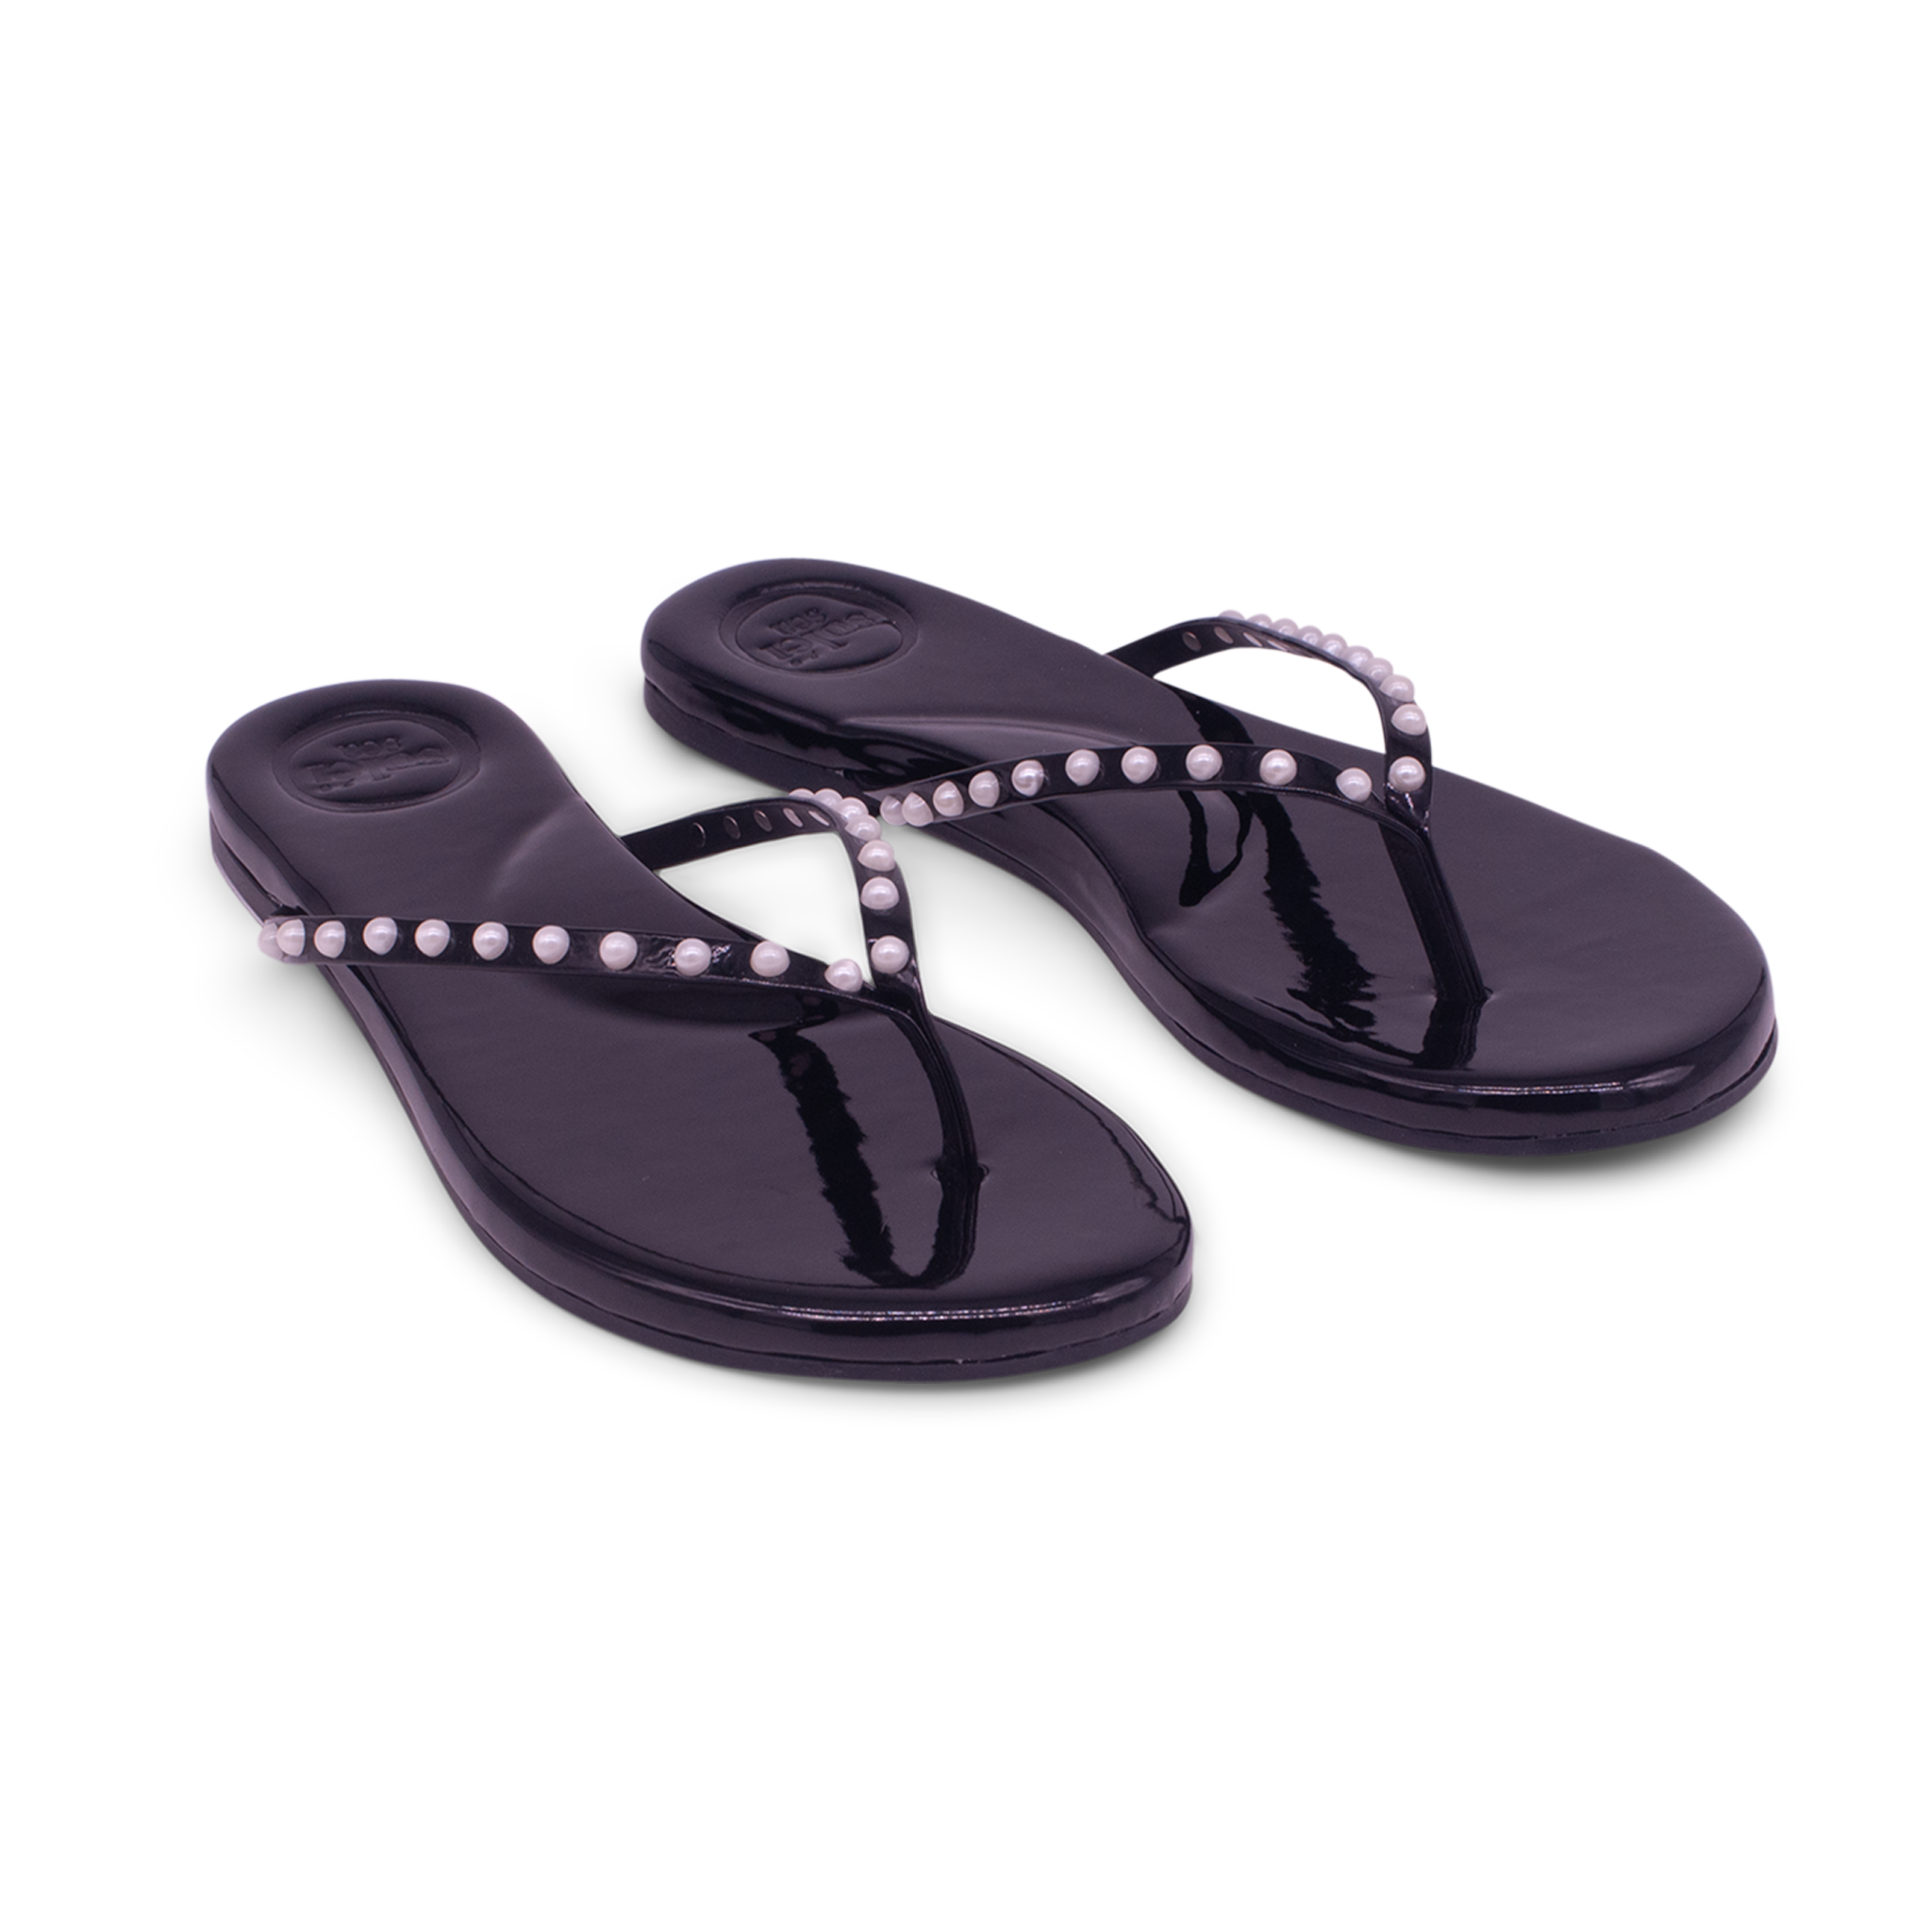 Indie Flip Flop sandal with white pearls and patent vegan leather in black